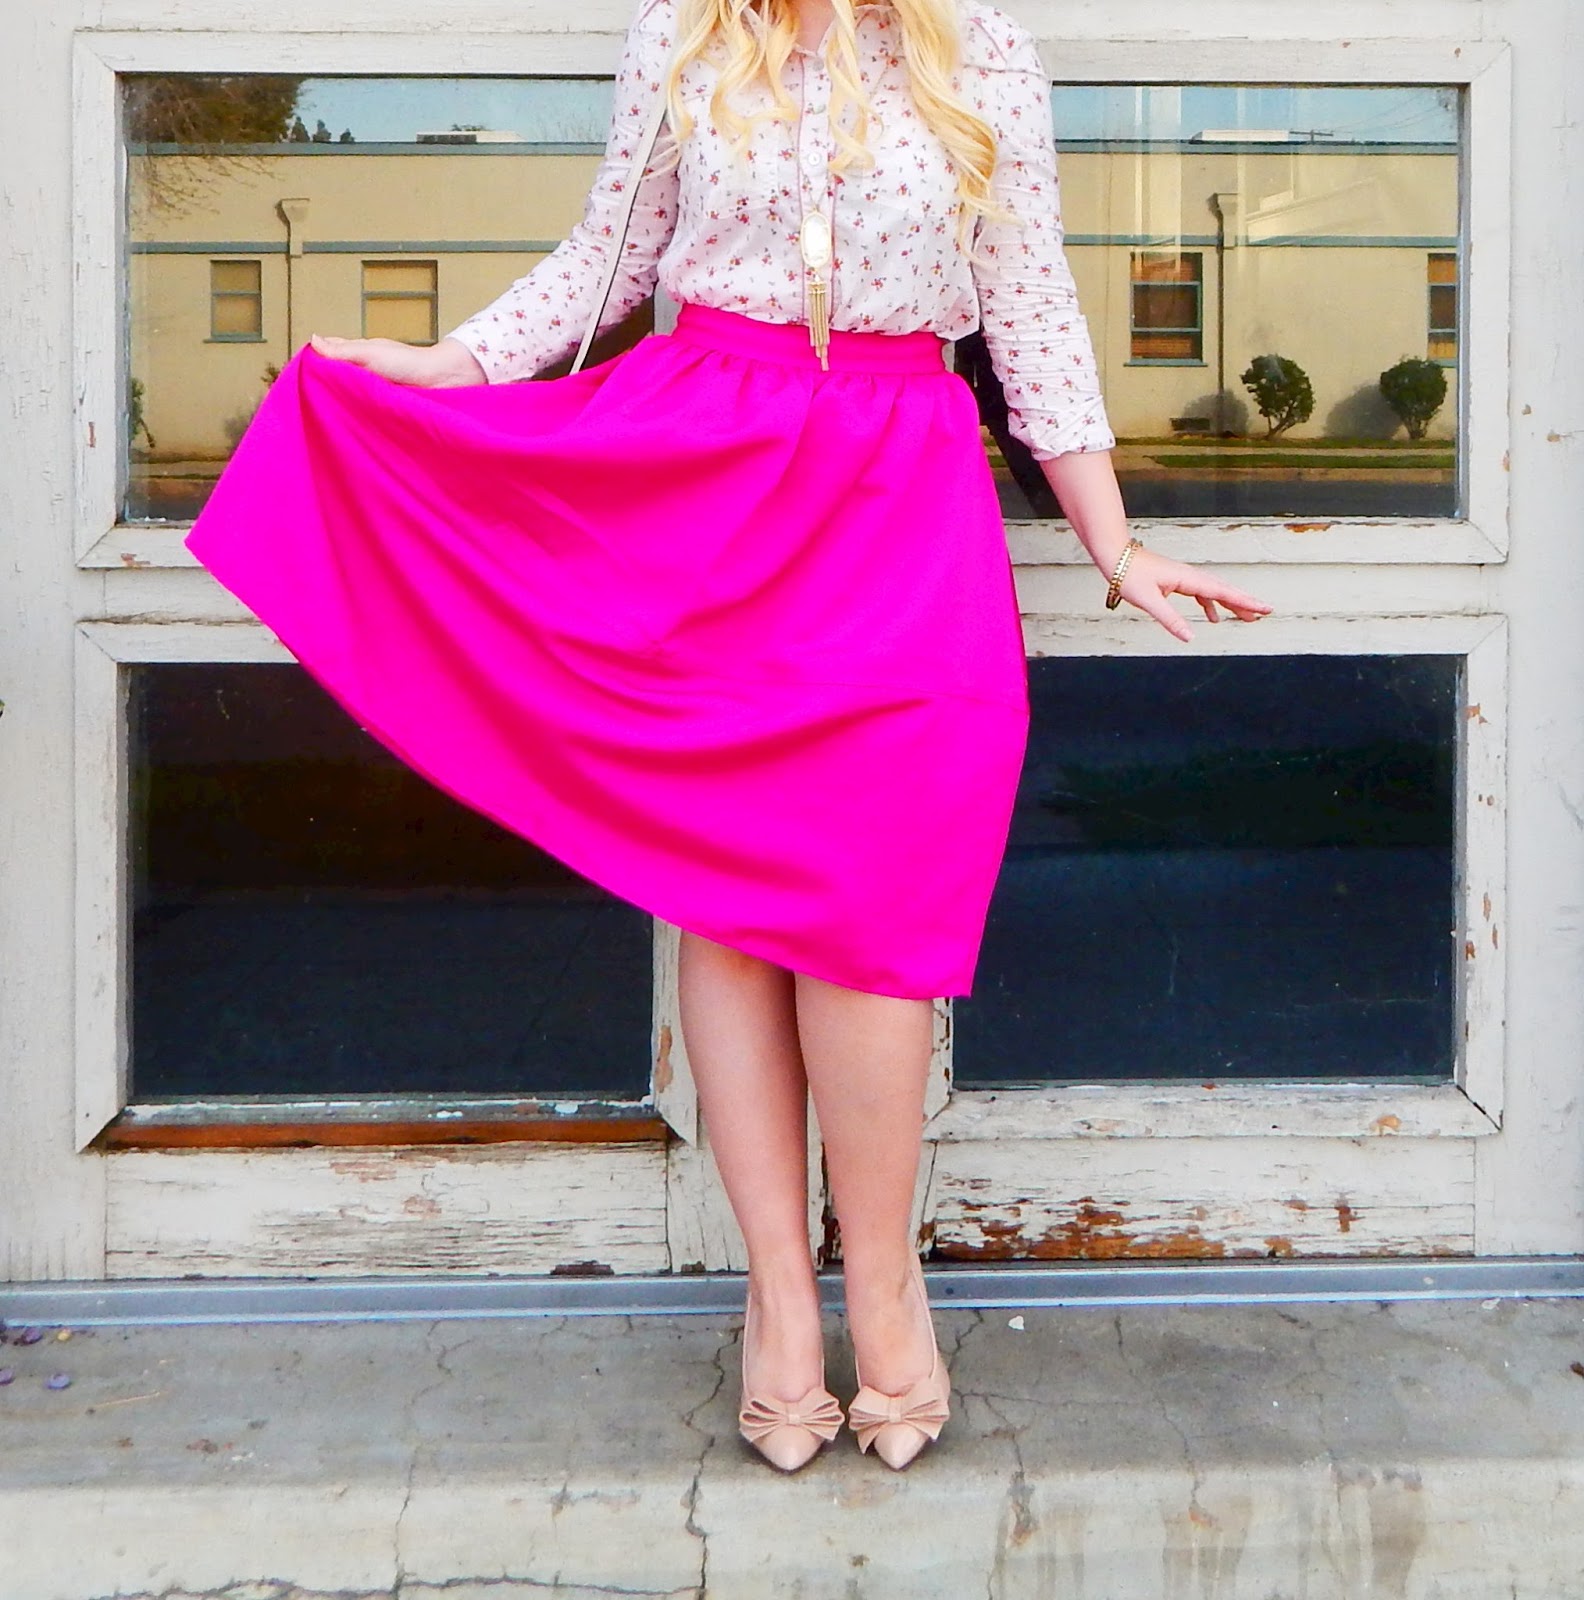 Feminine Bright Pink Skirt Outfit